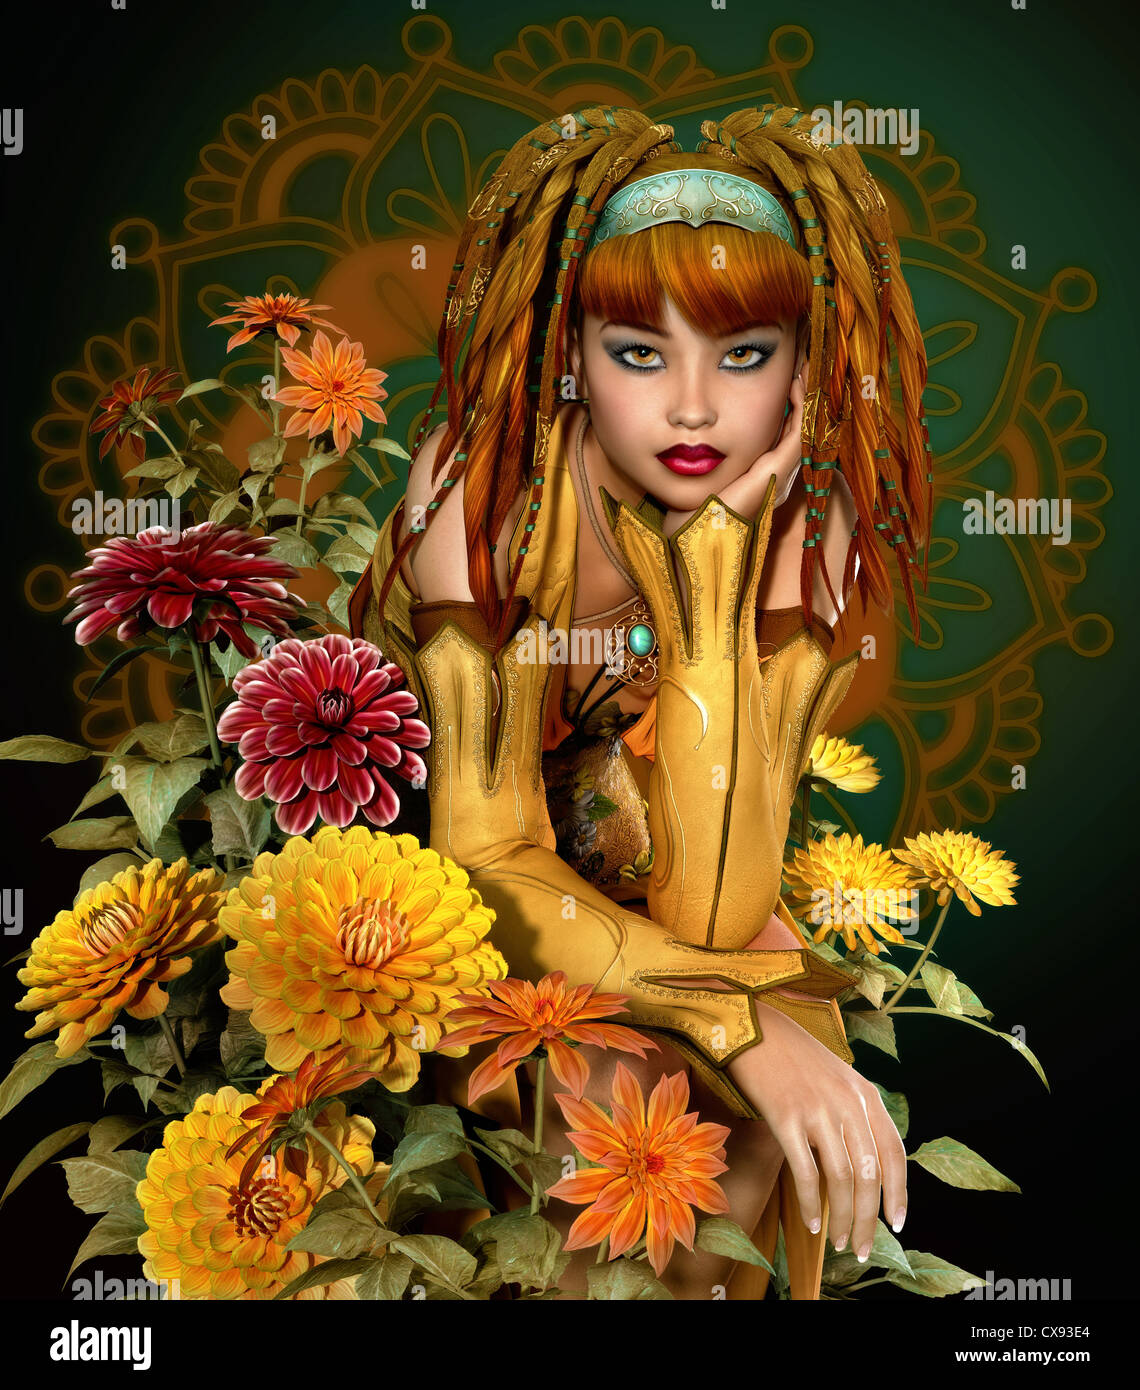 a girl with dreadlocks sits in the middle of dahlias Stock Photo